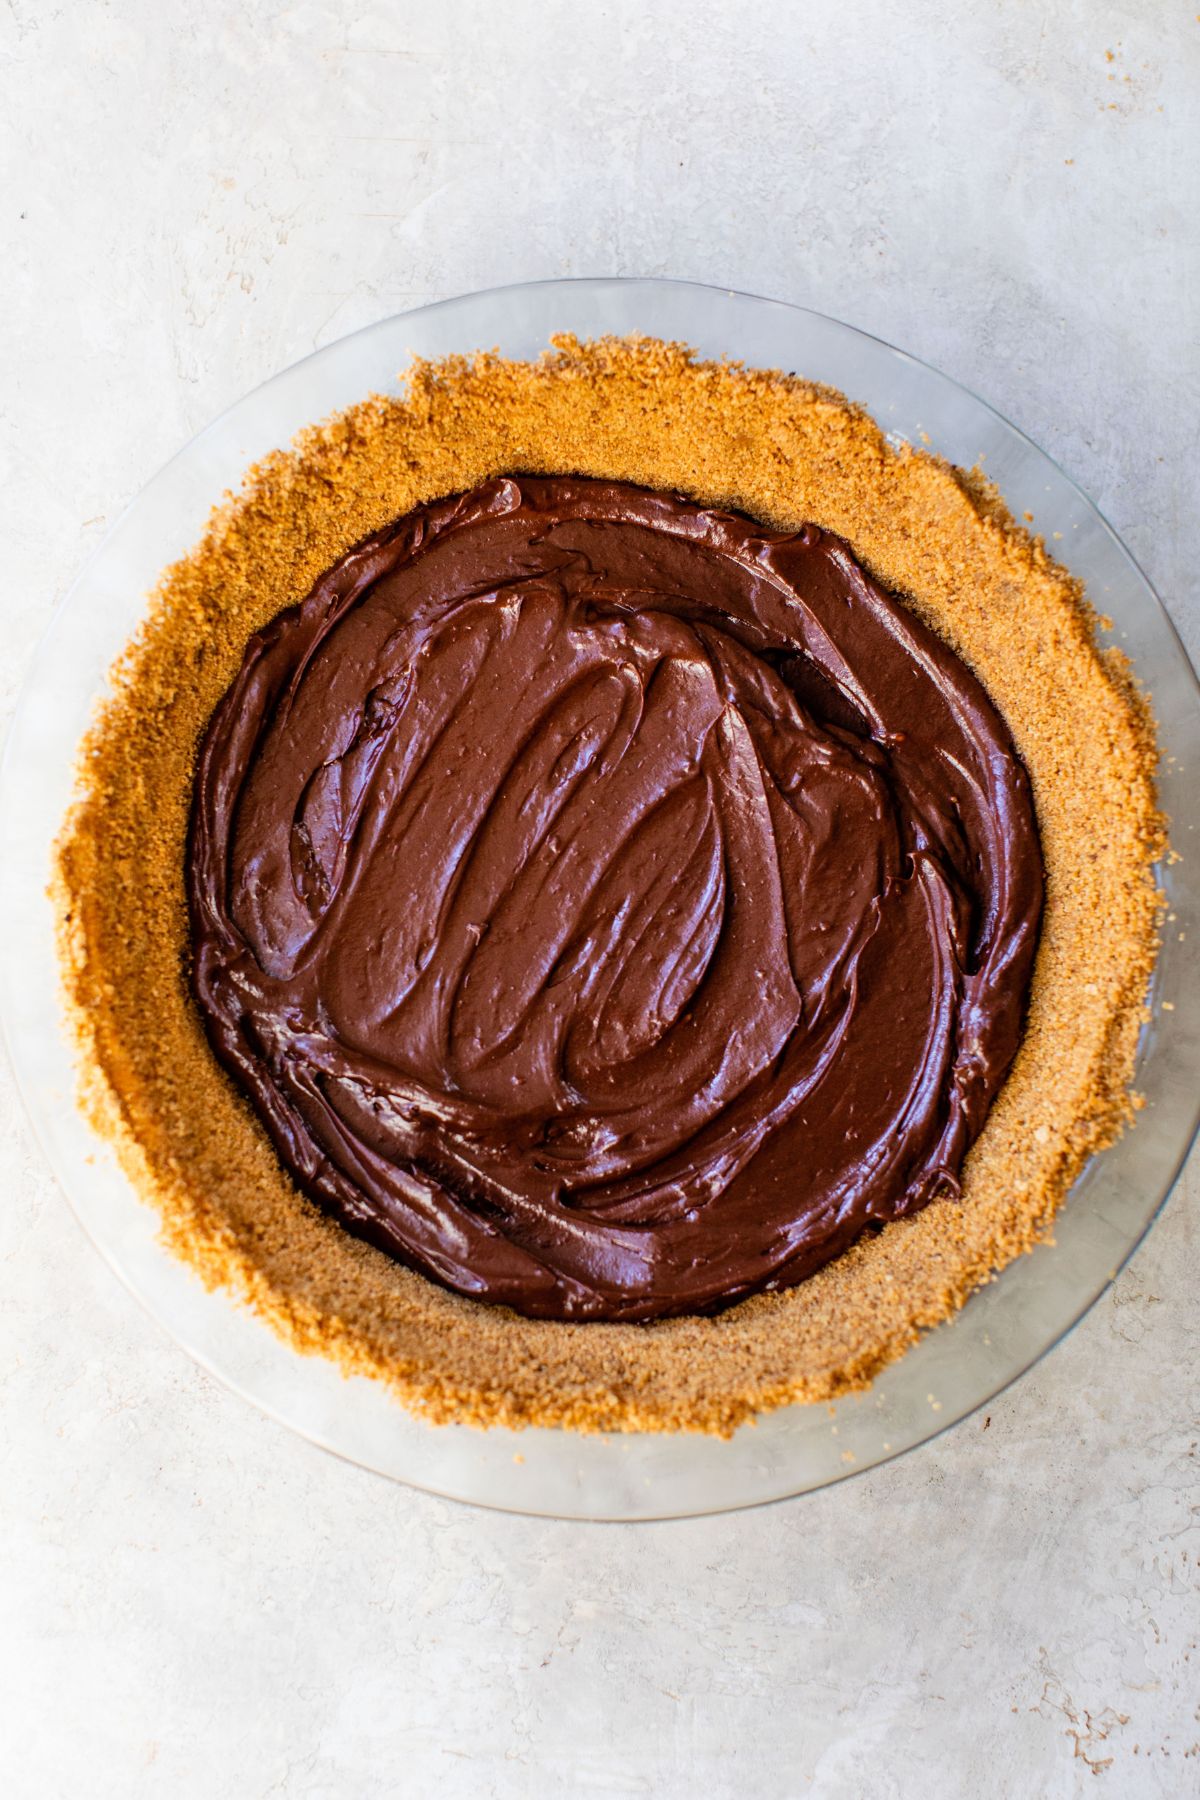 Chocolate filling in a graham cracker crust.